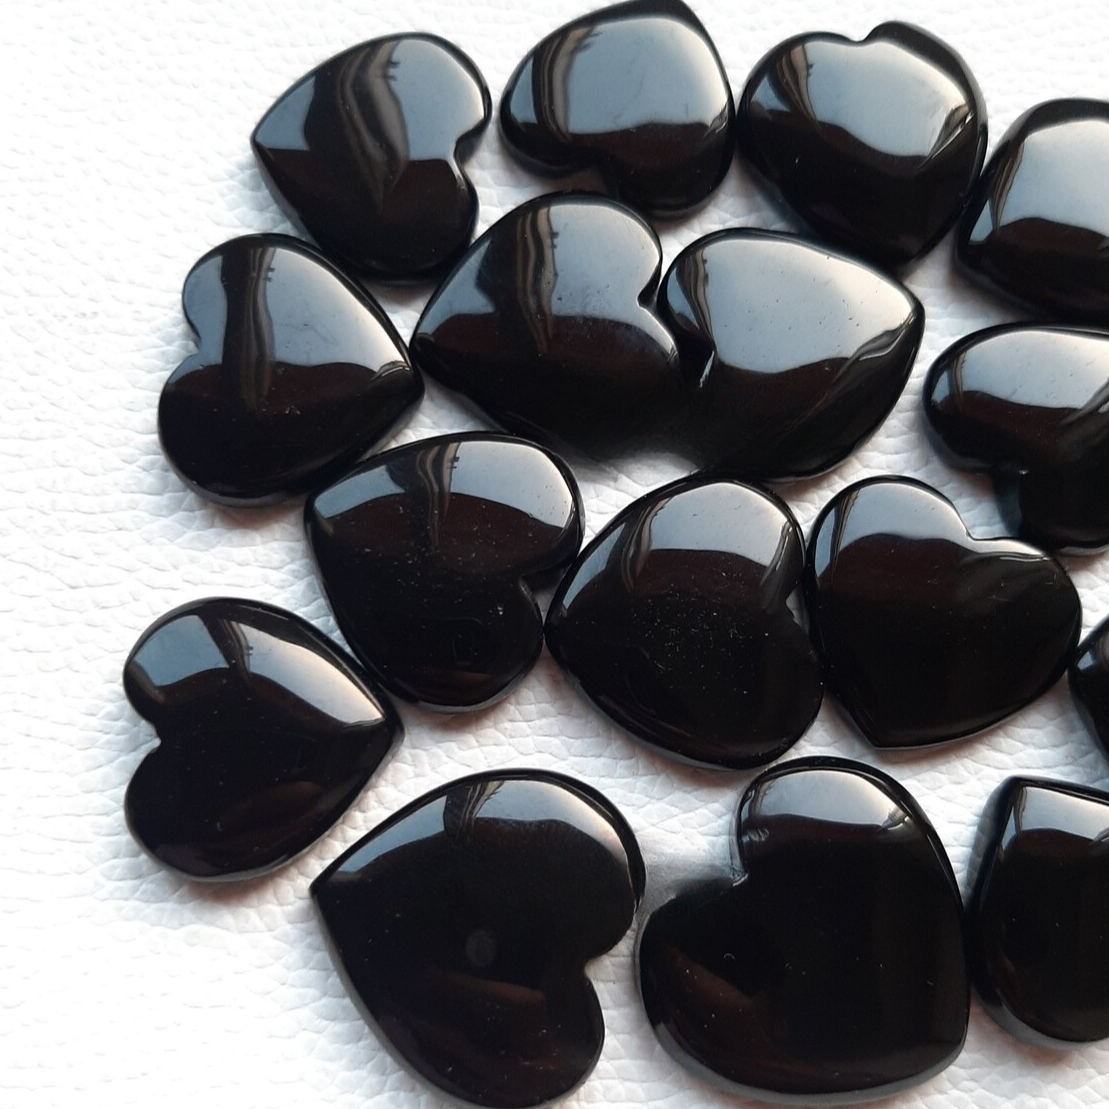 BLACK ONYX Heart Shape Cabochon Wholesale Lot By  Weight With Different Shapes And Sizes Used For Jewelry Making (Natural)